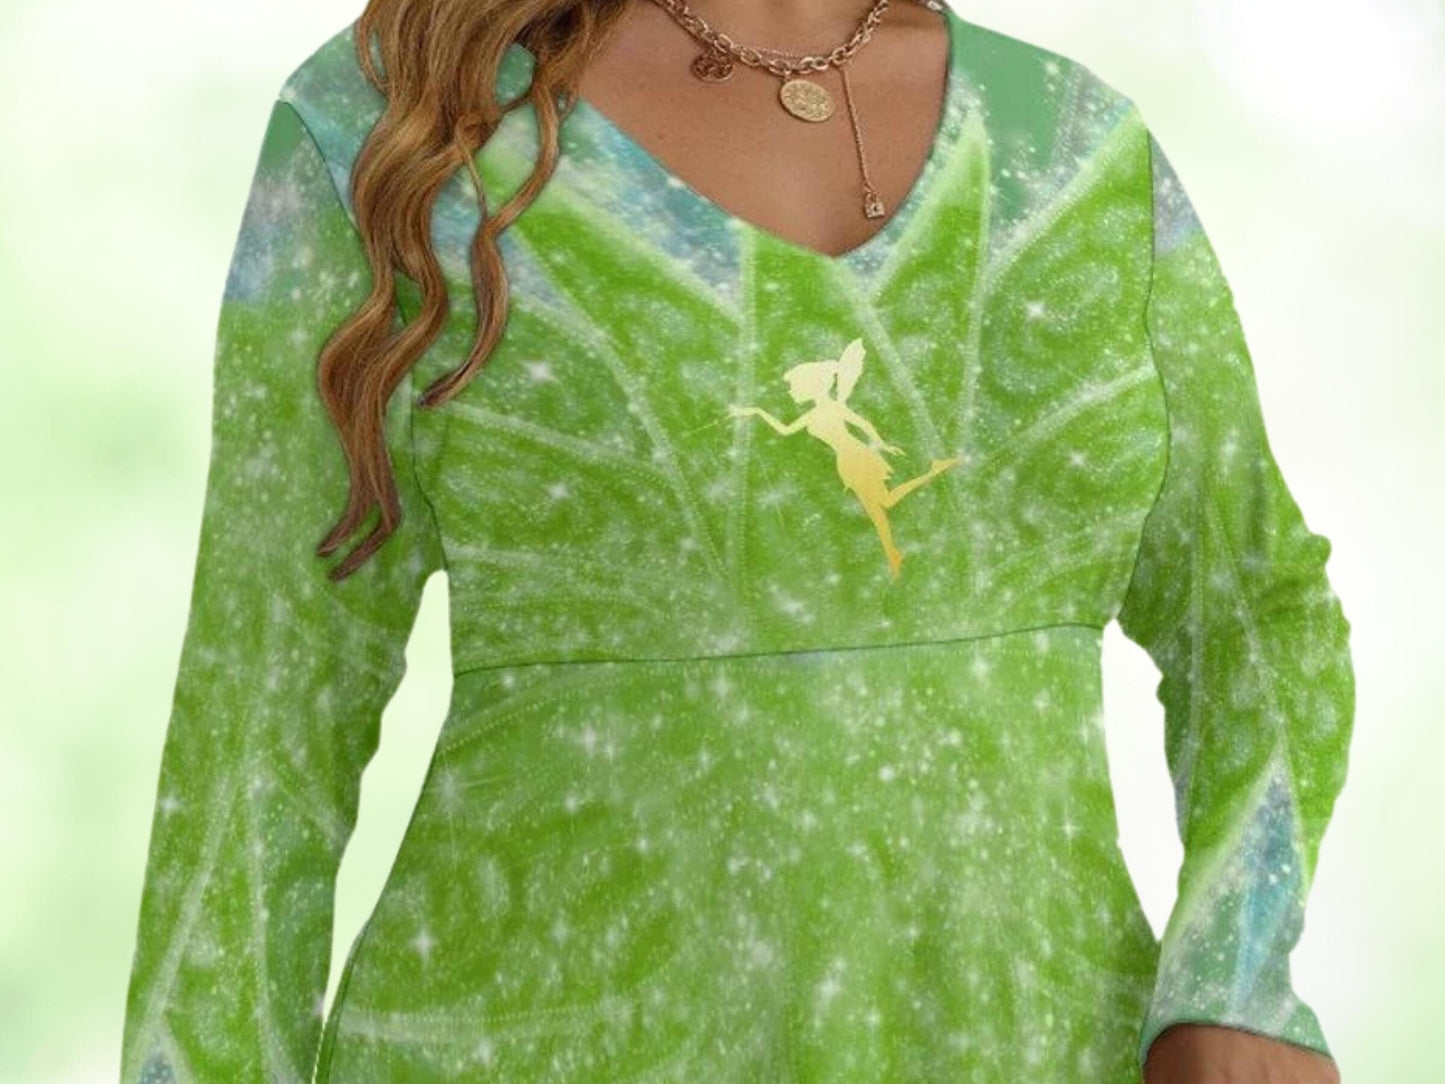 Tinkerbell Inspired Plus Size Harlequin Women's Long Sleeve Dress (Plus Size), Gift for Her, Halloween Dress, Adult Halloween Costume